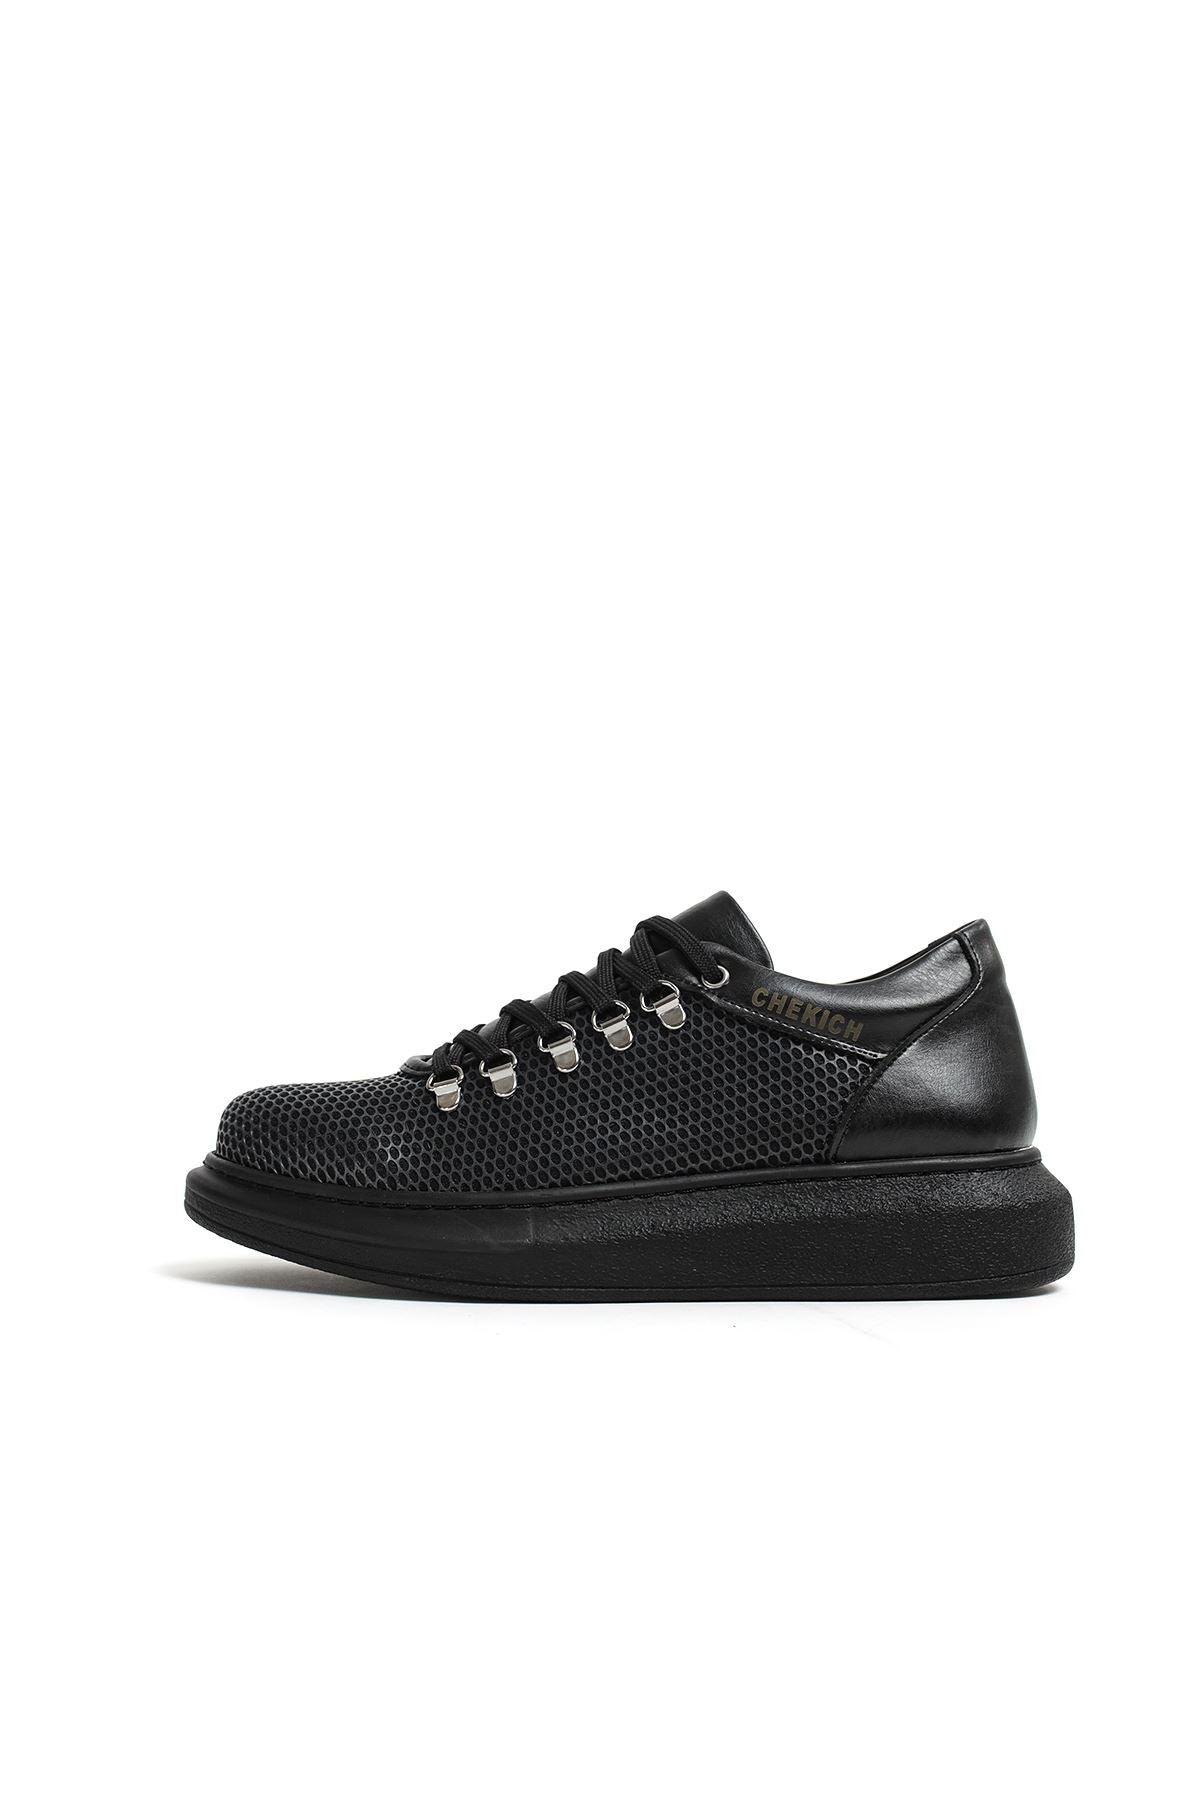 CH021 Men's Unisex Full black Honeycomb Processing Casual Sneaker Sports Shoes - STREET MODE ™